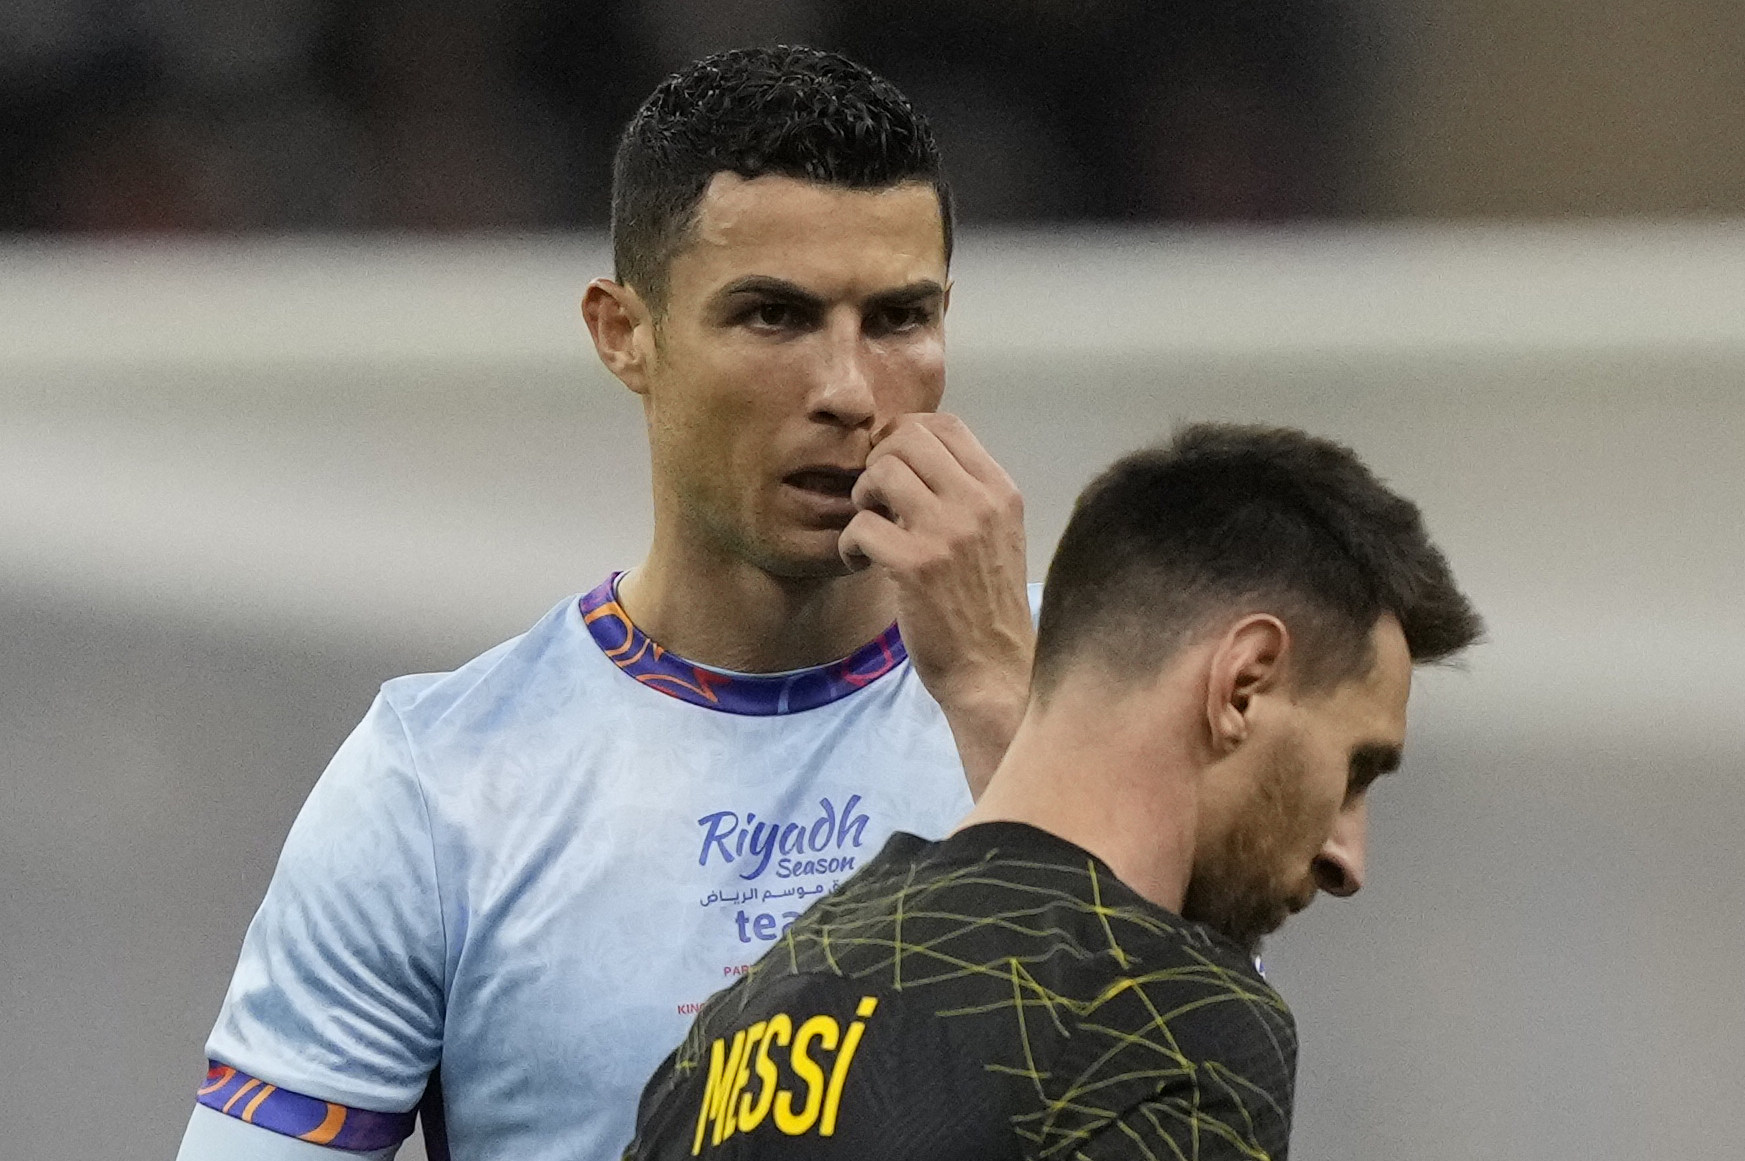 Cristiano Ronaldo and Lionel Messi were reunited during a friendly match at the King Saud University Stadium in Riyadh, Saudi Arabia. Photo: AP